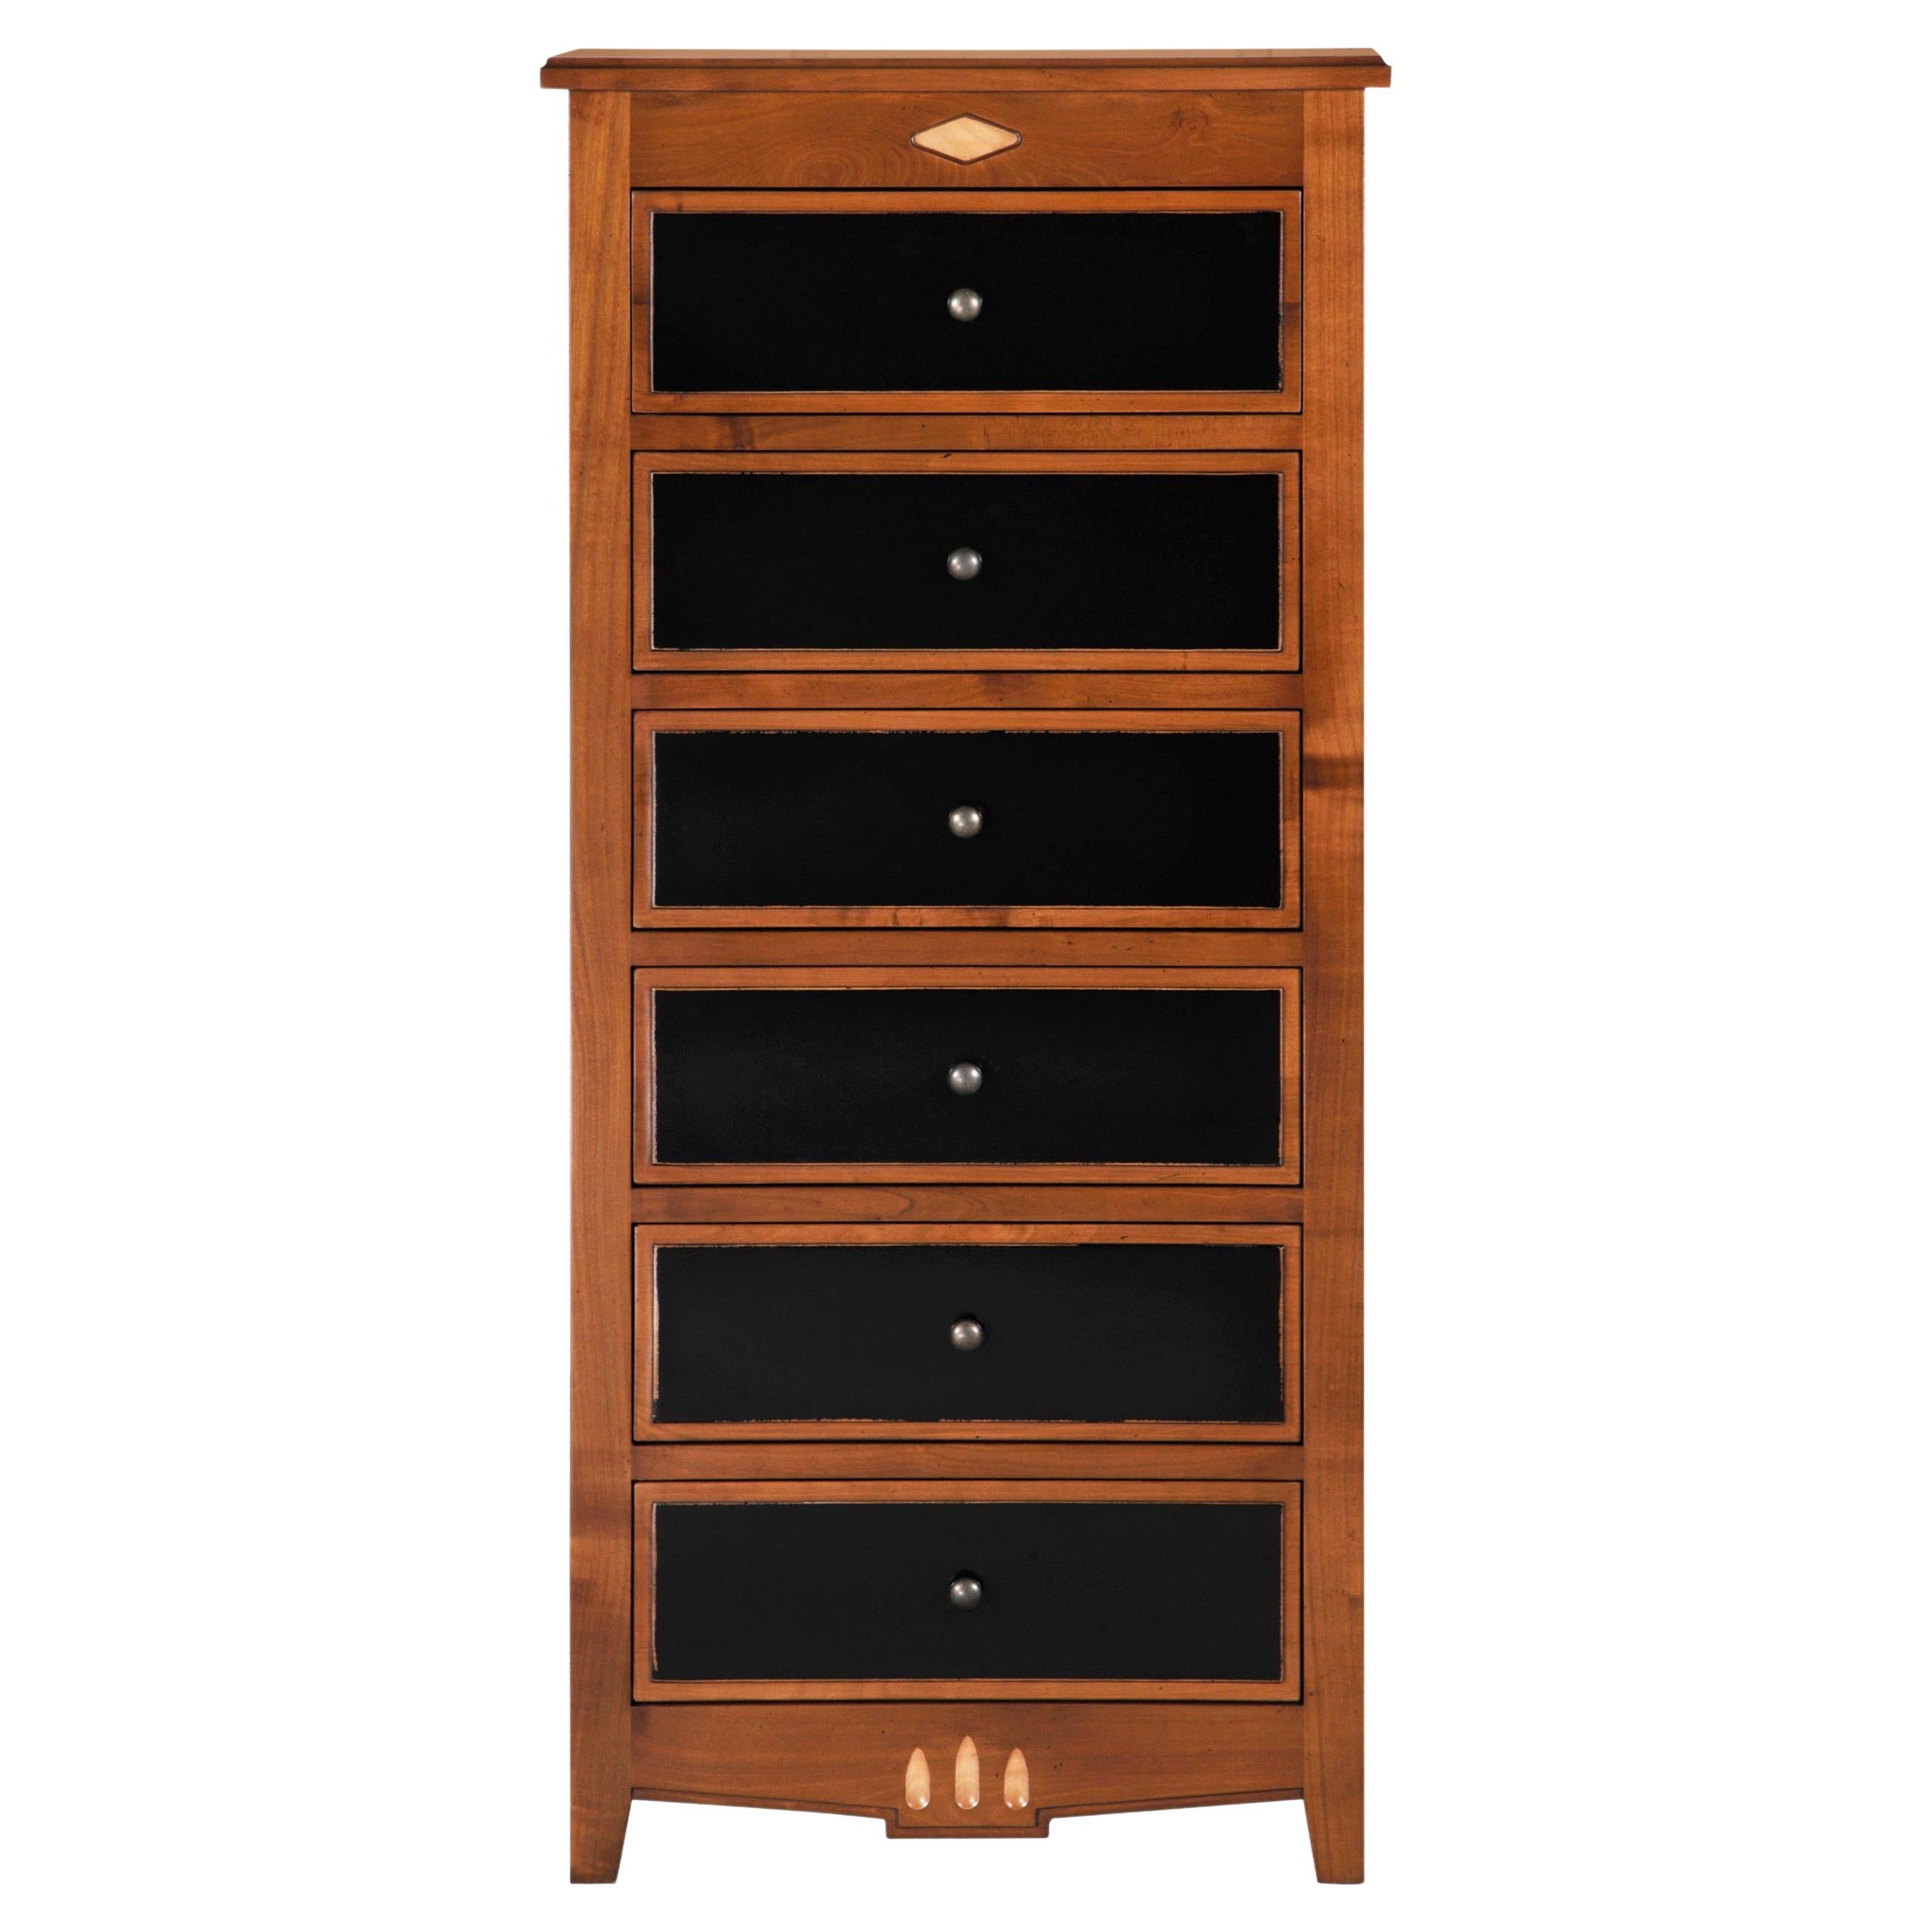 6-Drawer "Chiffonnier" in cherry Louis XVI style with black laquered Drawers